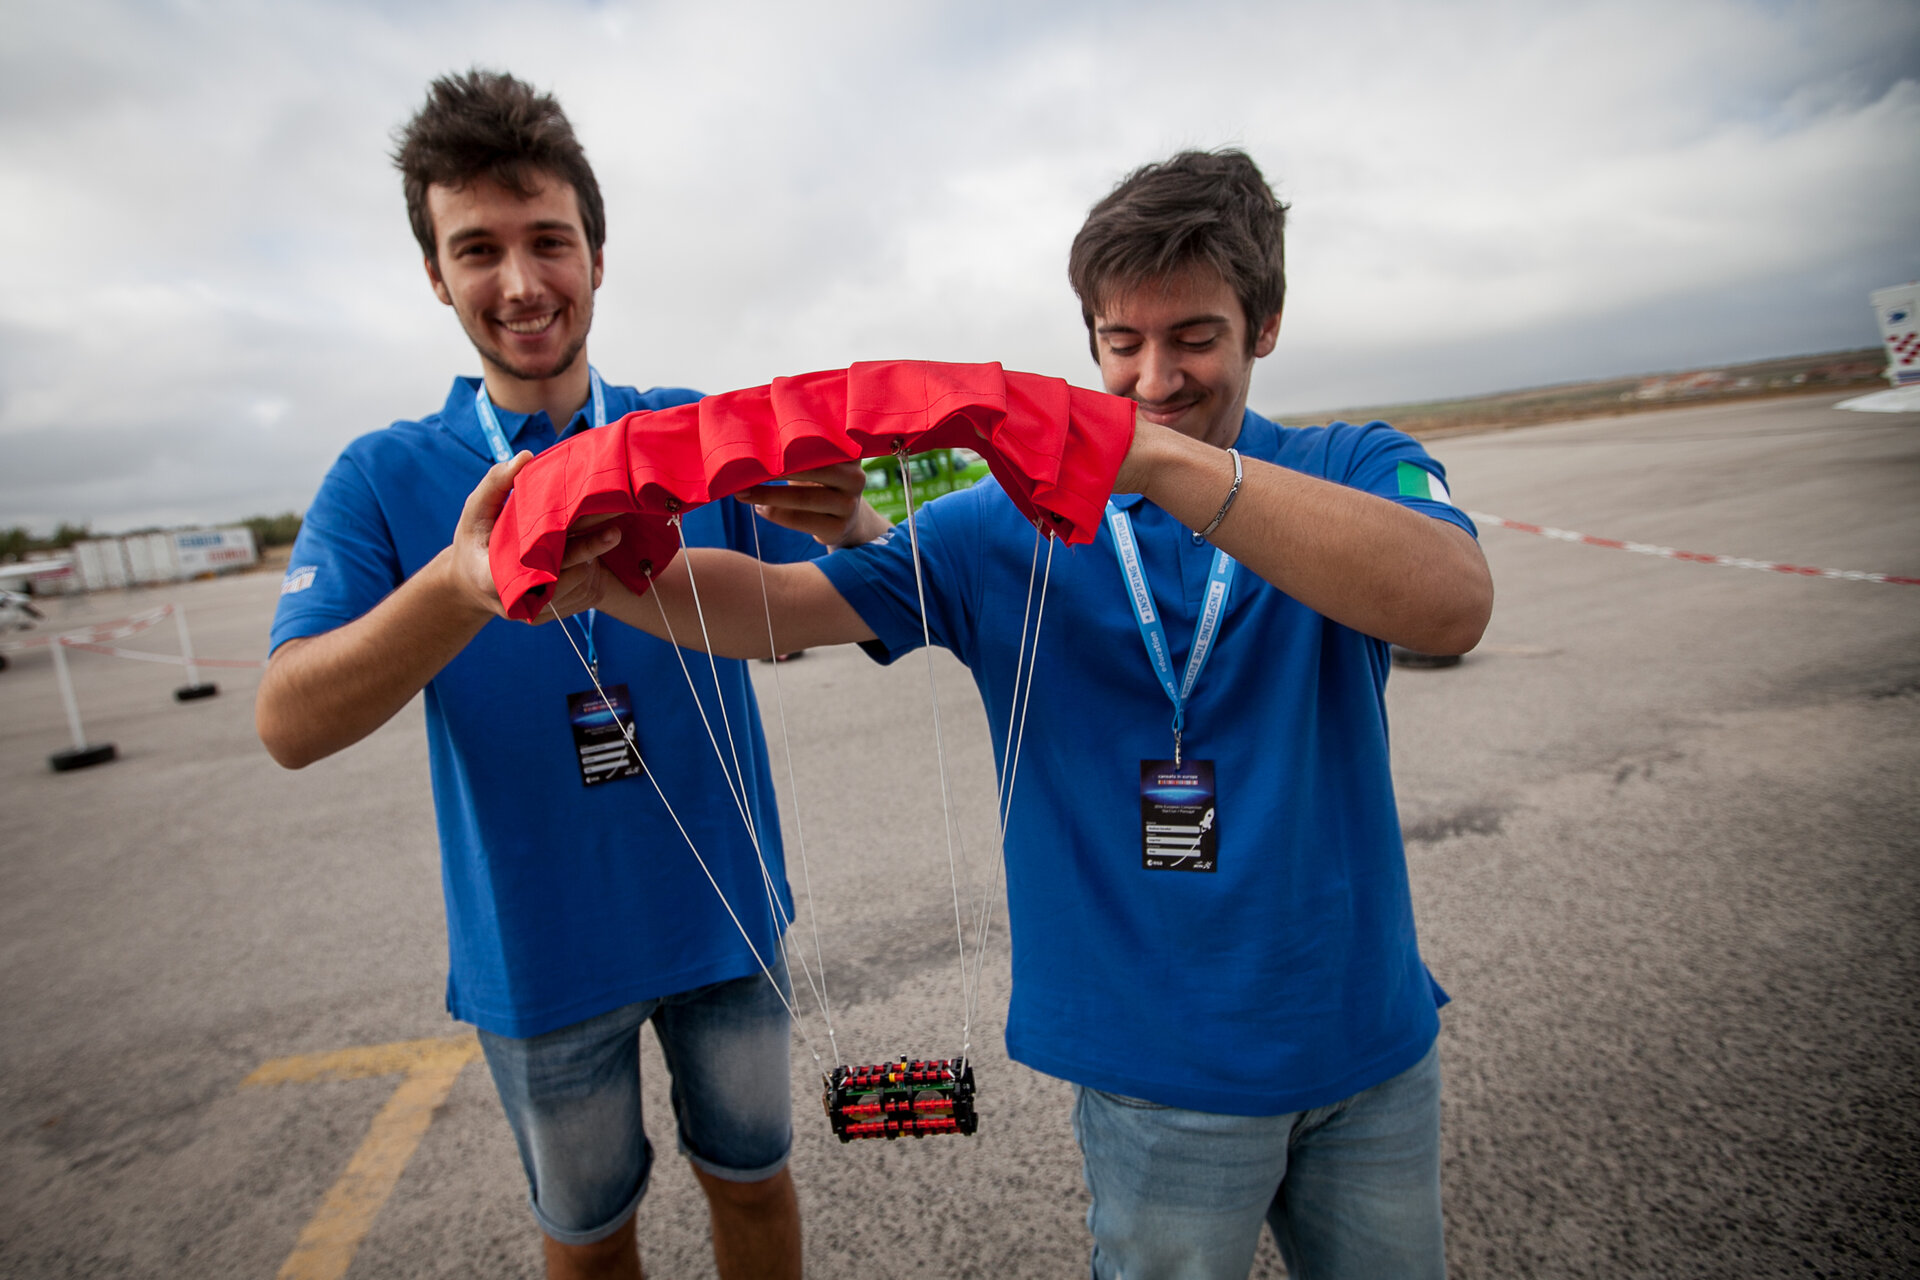 CanSat with its parachute 